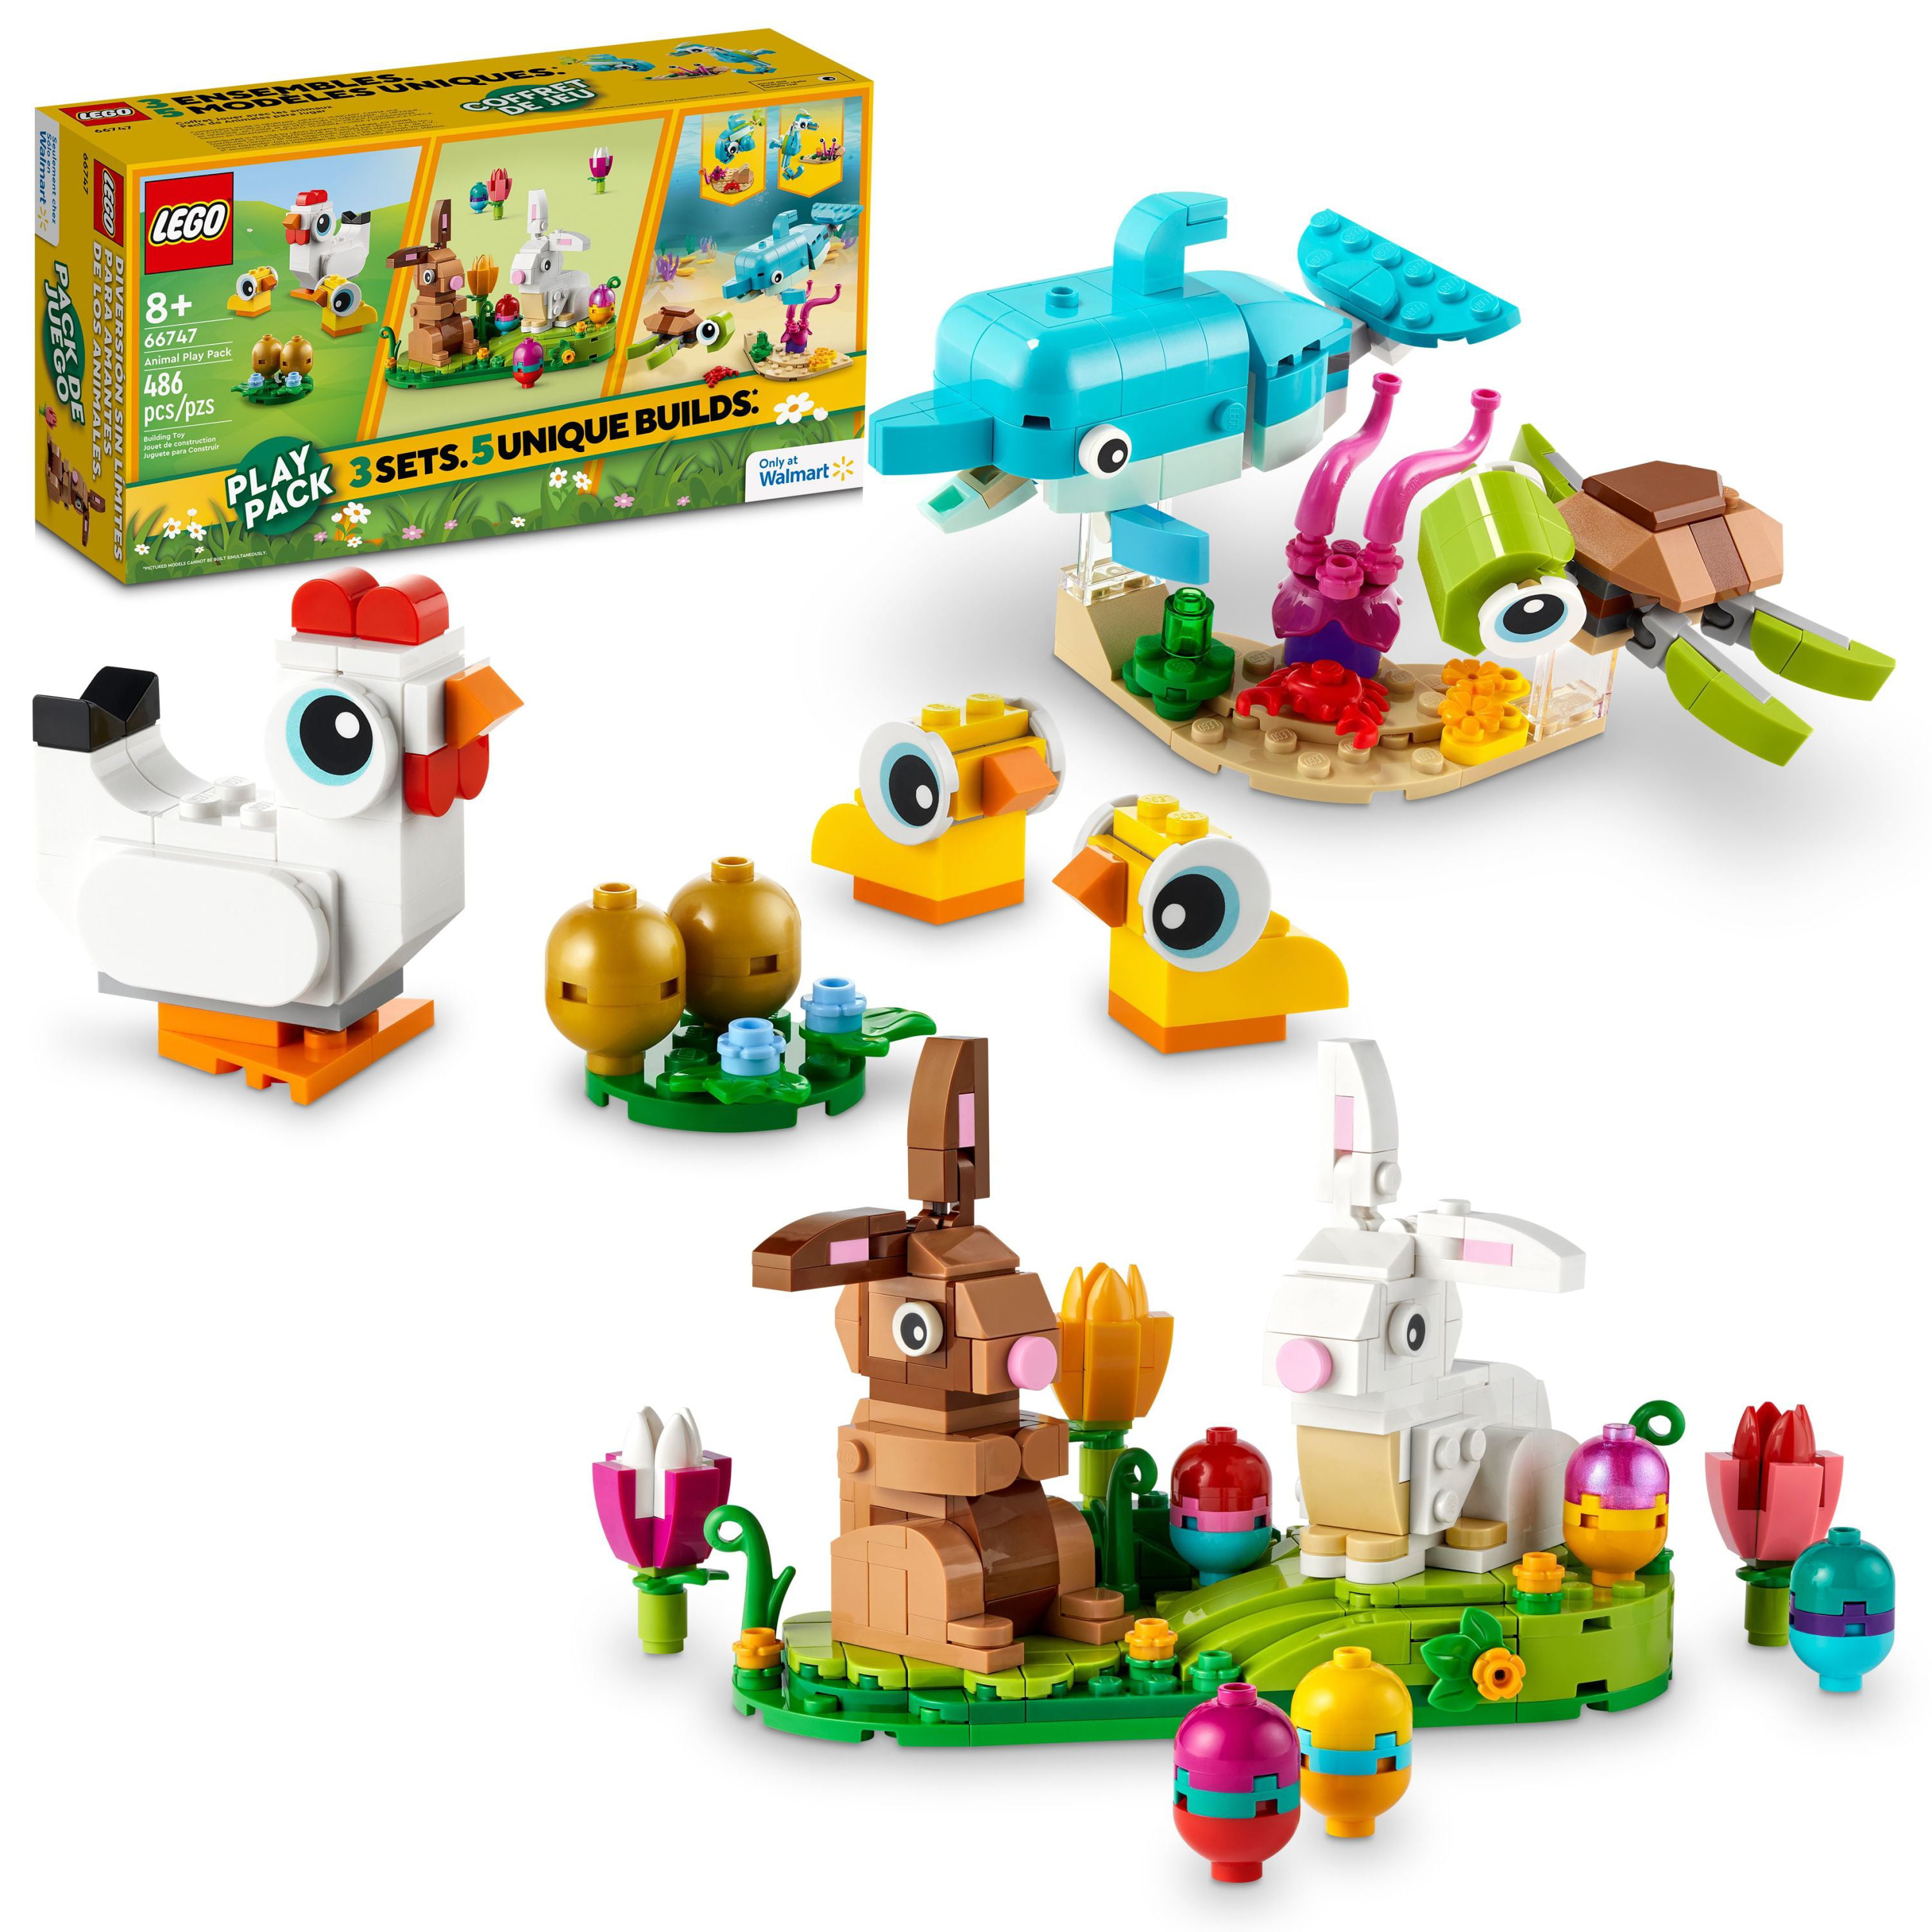 Walmart has LEGO Animal Play Pack Set # 66747 (486 Pieces) for $14.97 YMMV